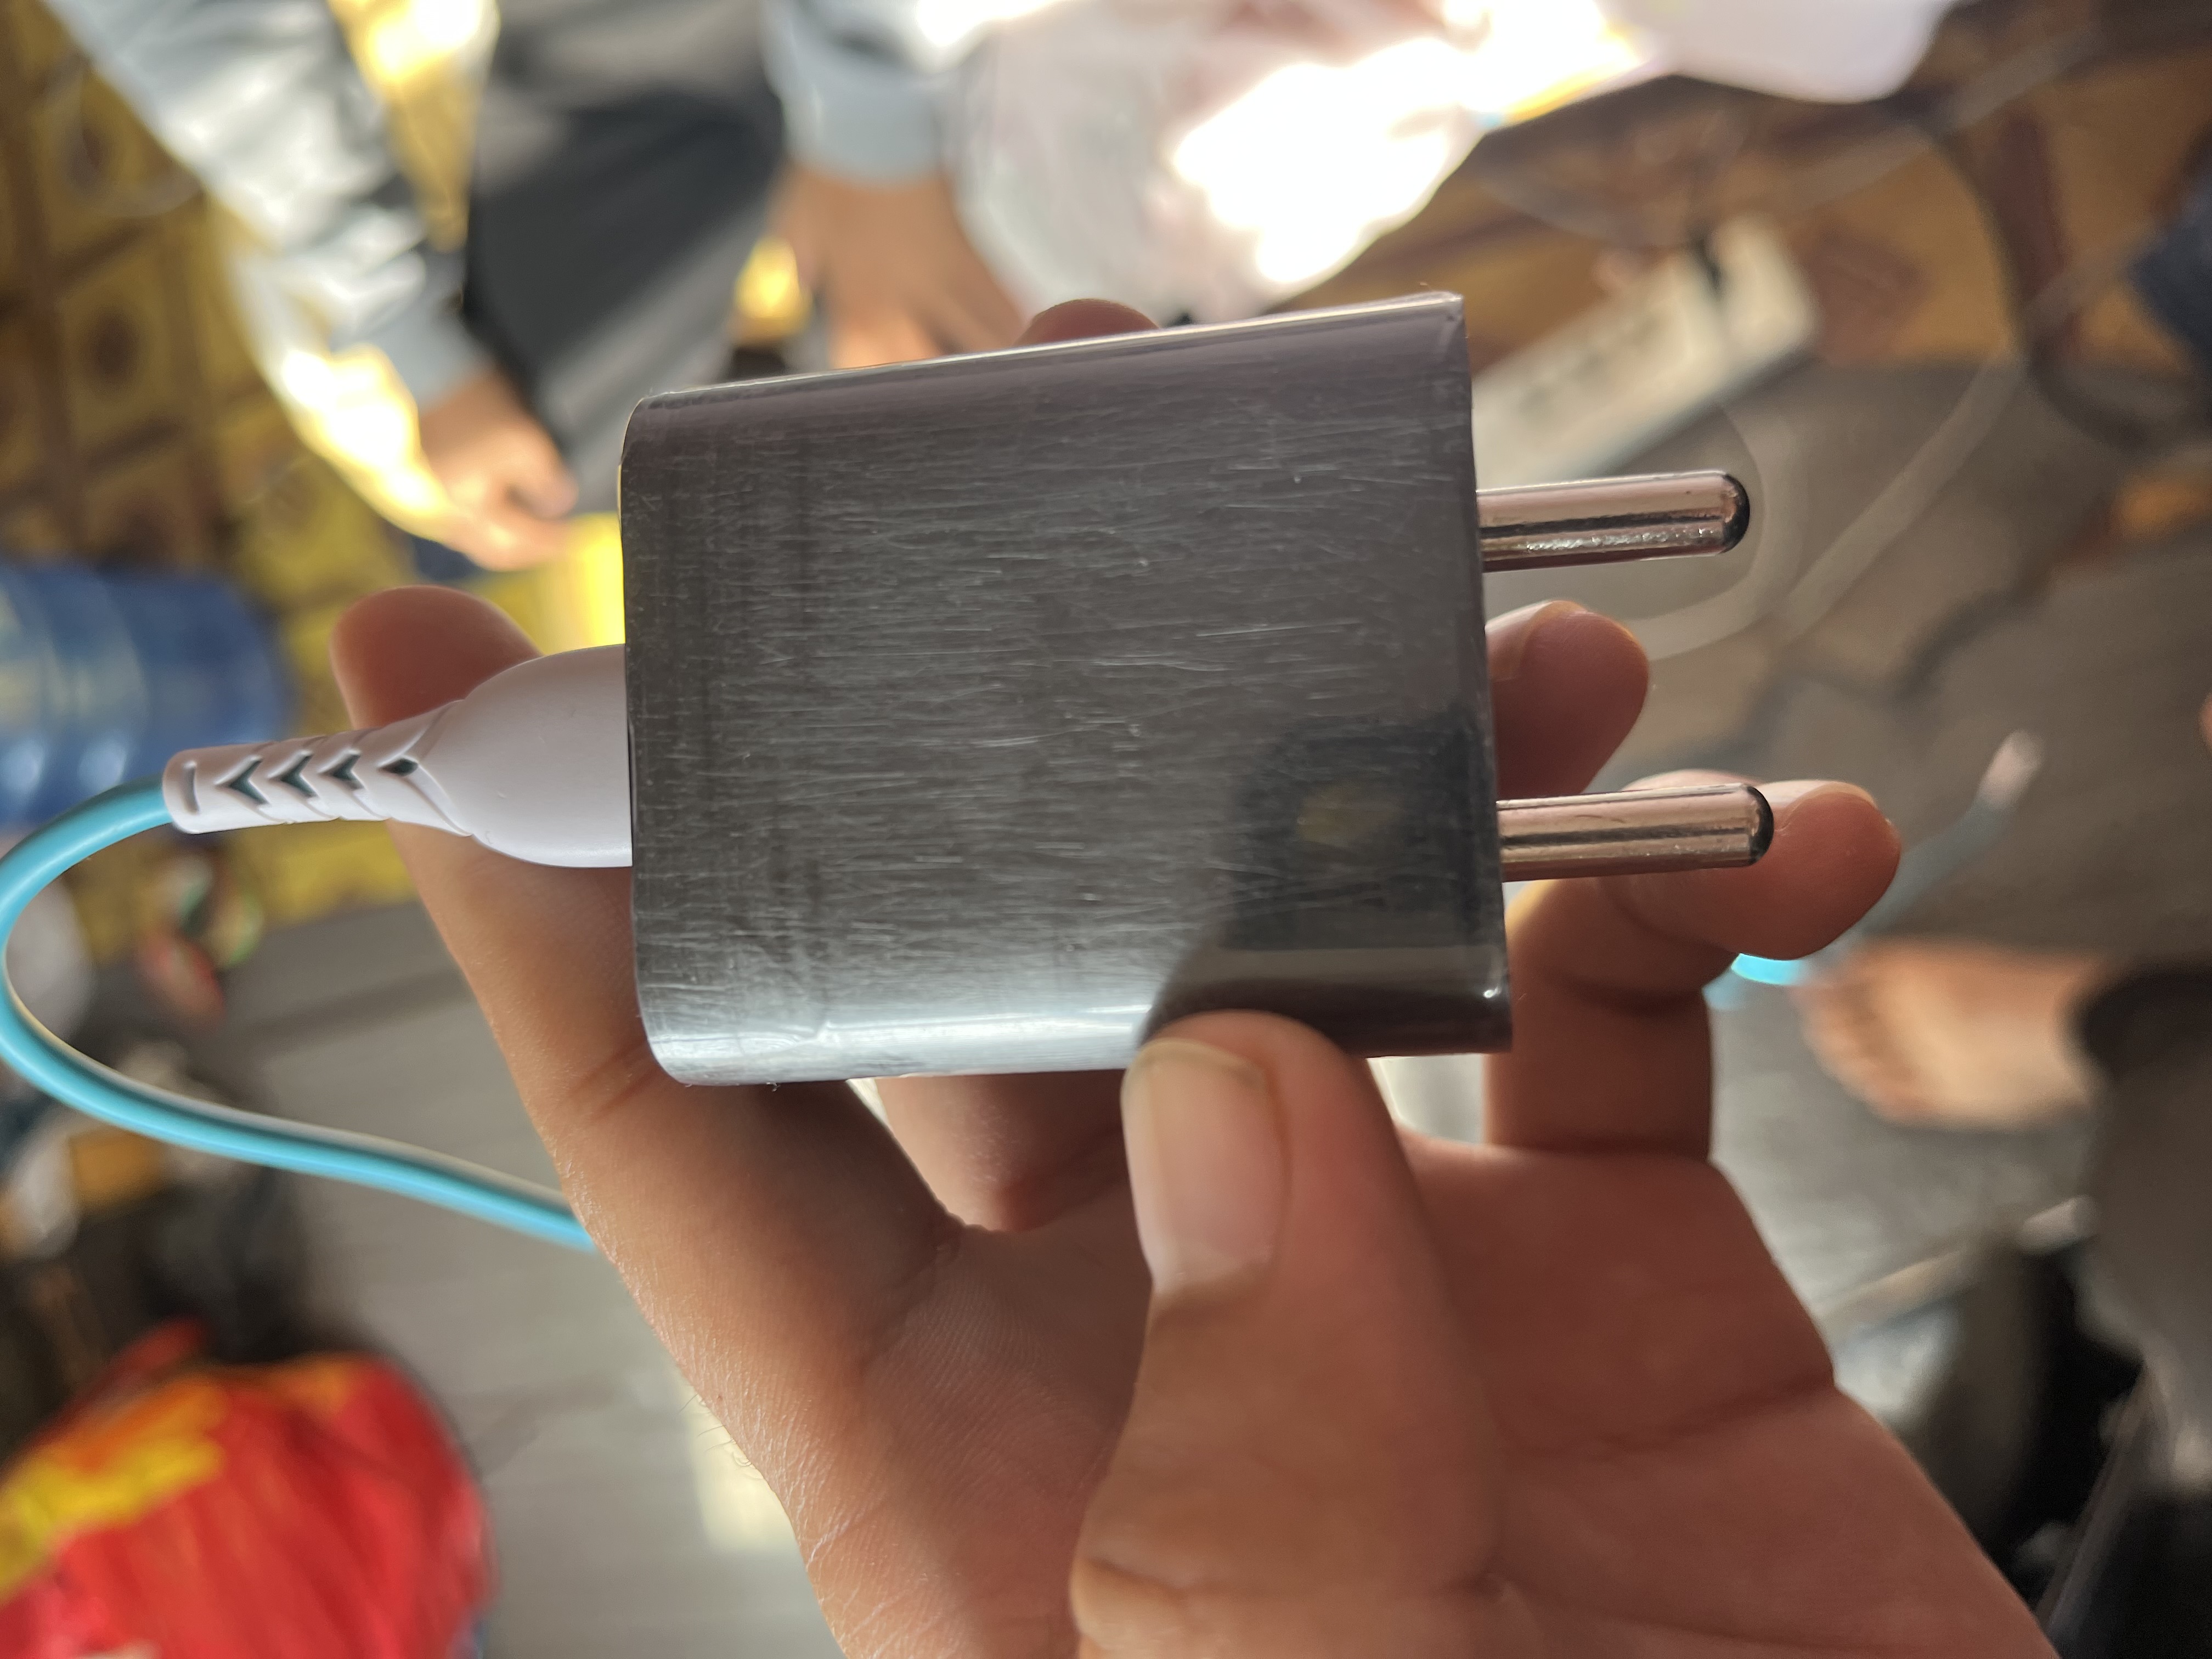 Xiaomi Mi Standard Charger (Qualcomm® Quick Charge™ 3.0)